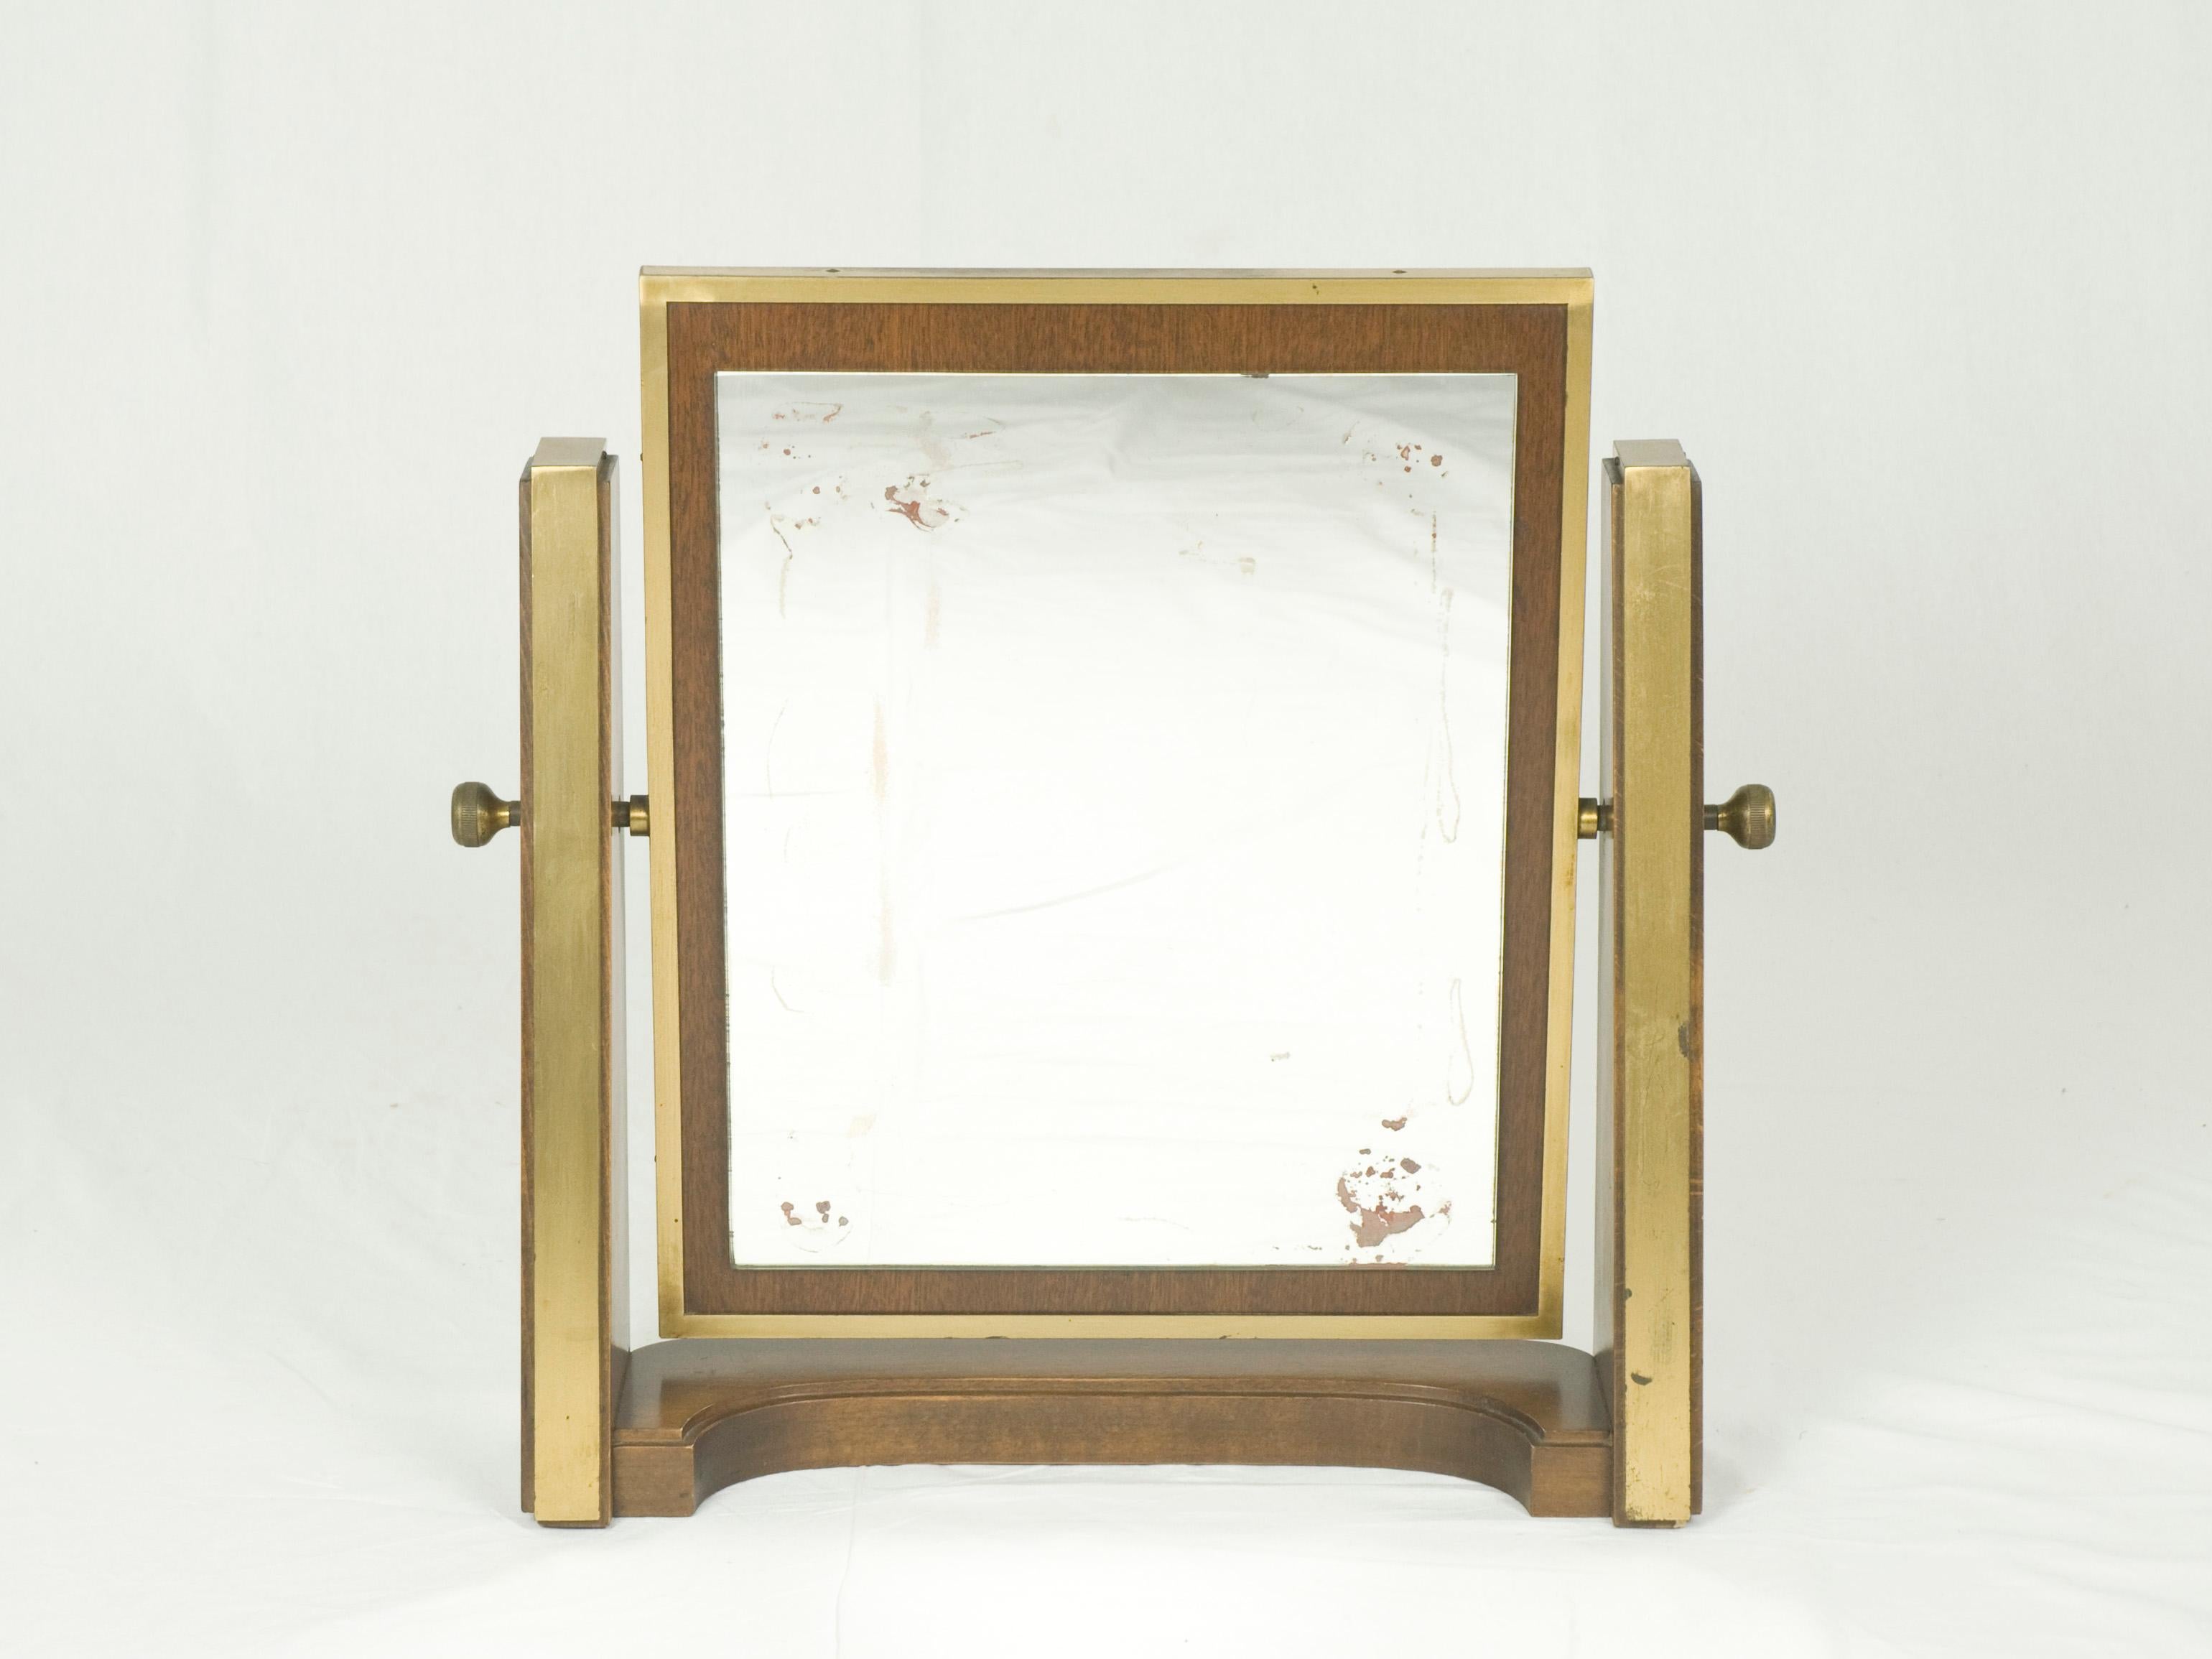 This fine vanity mirror is made from wood and brass with a tilting mirror and usefull brass lockers. It remains in a good vintage condition: Some visible oxidation spots on the mirror (as display in the pictures), patina on the brass.